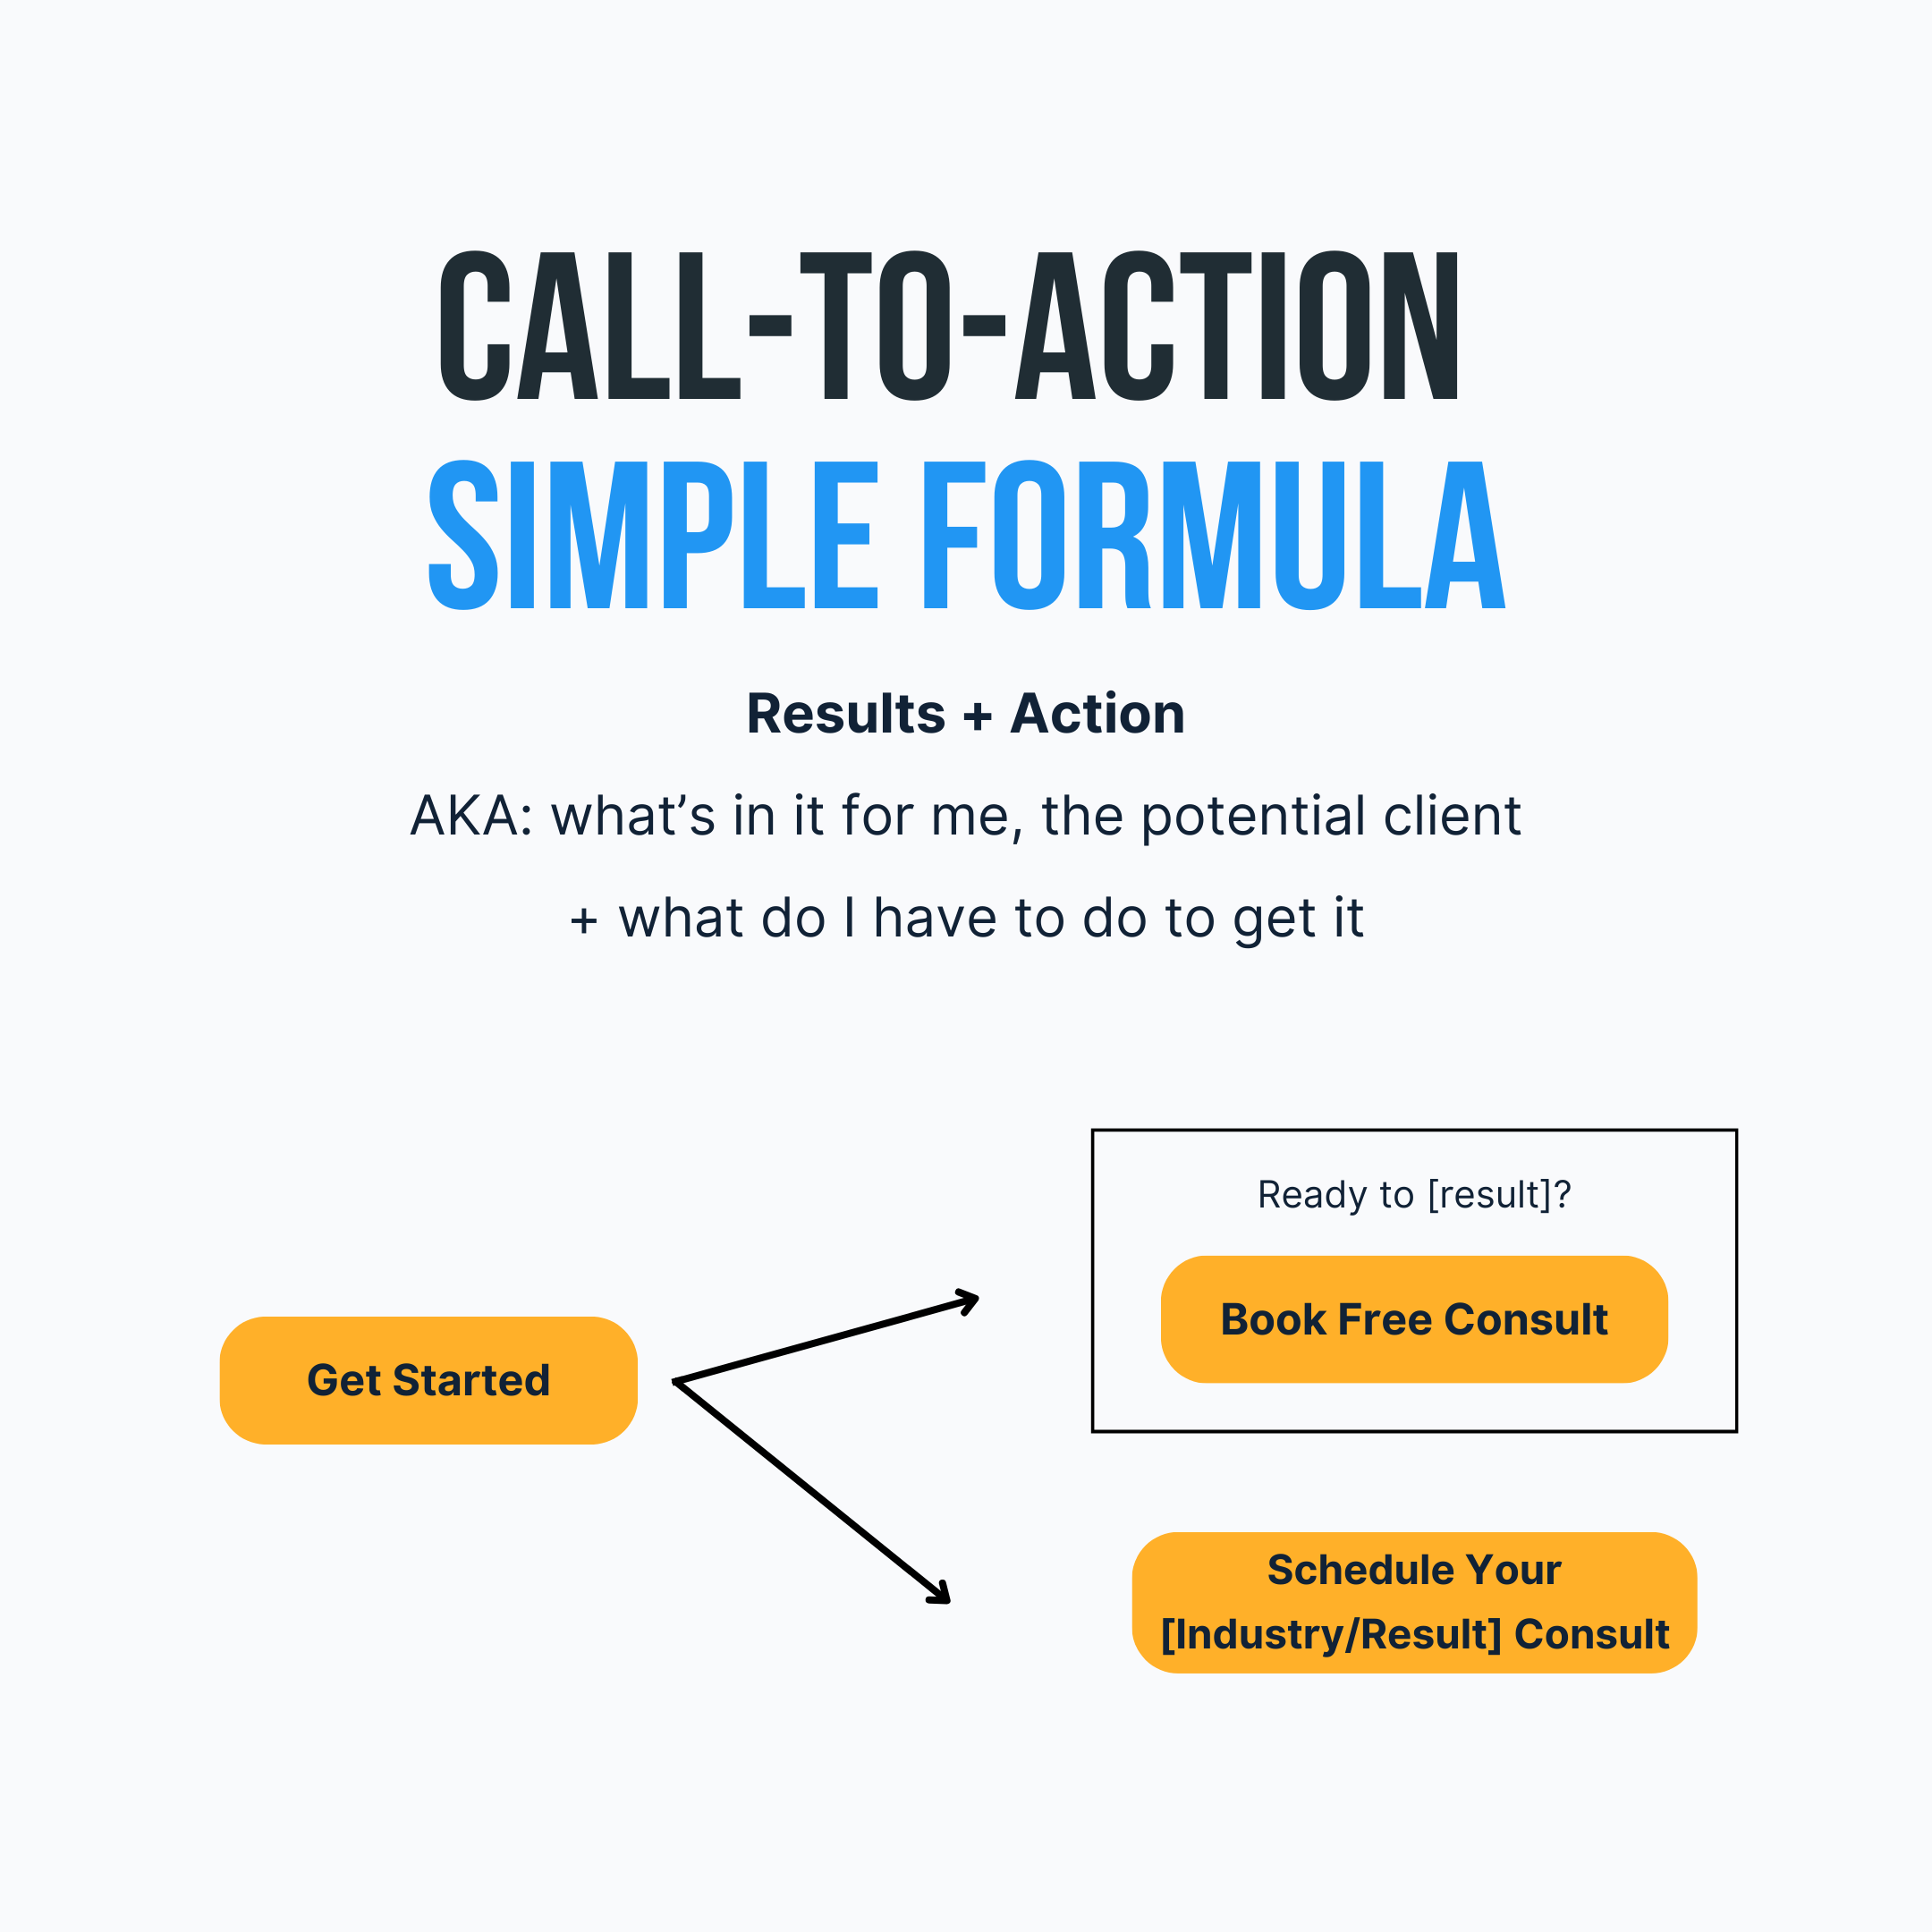 Here's a simple formula for calls-to-action. Focus on results and action (it's all about solving problems).